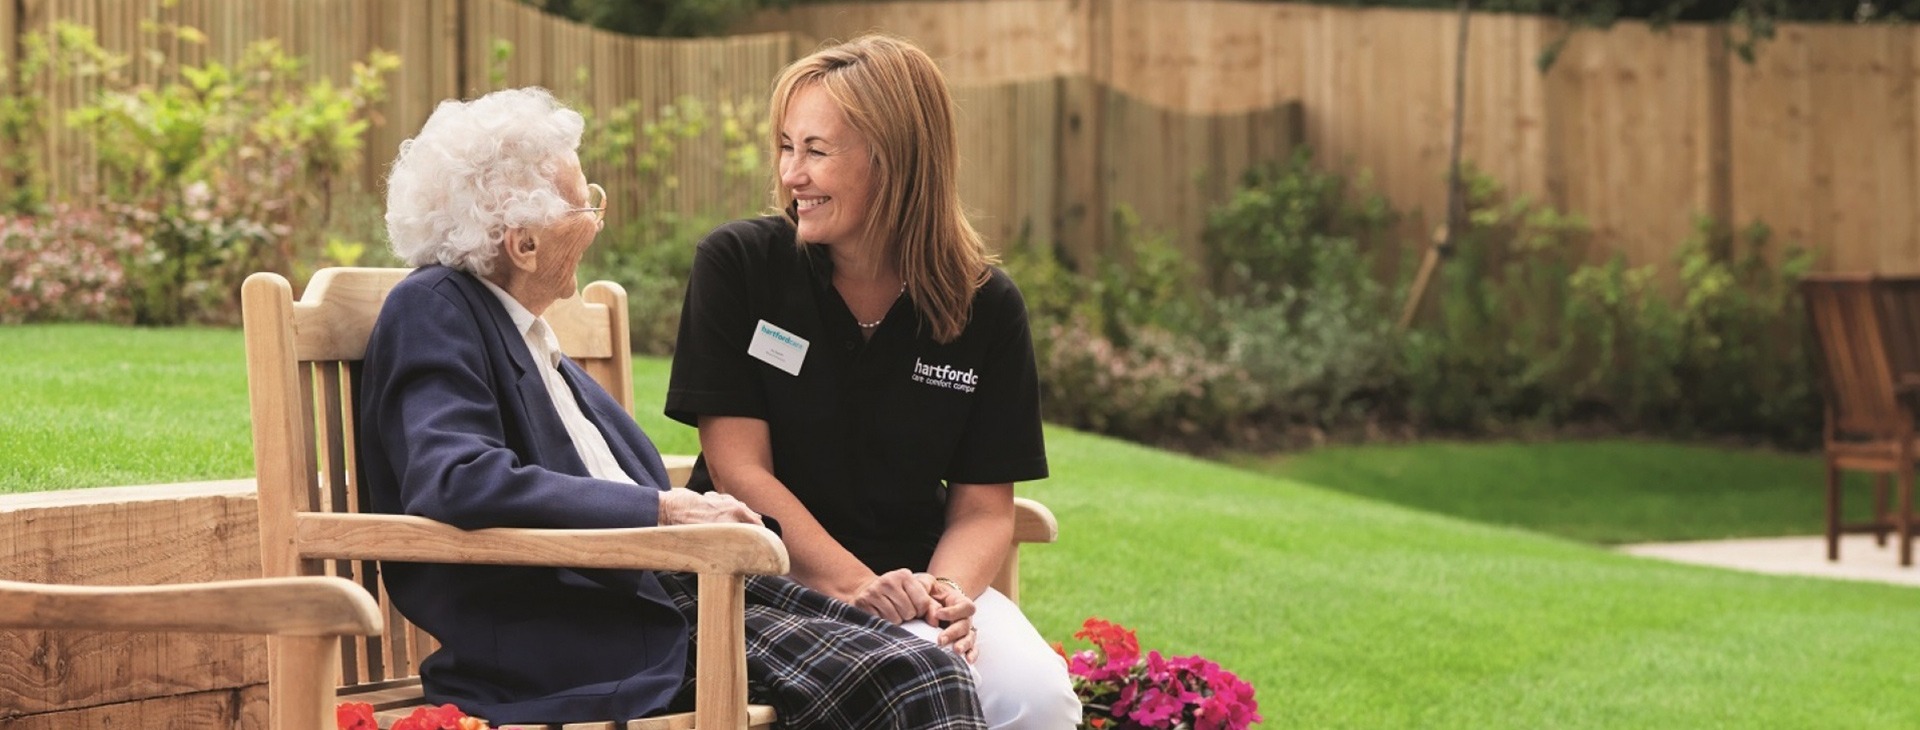 Care assistant and patient chatting on a bench